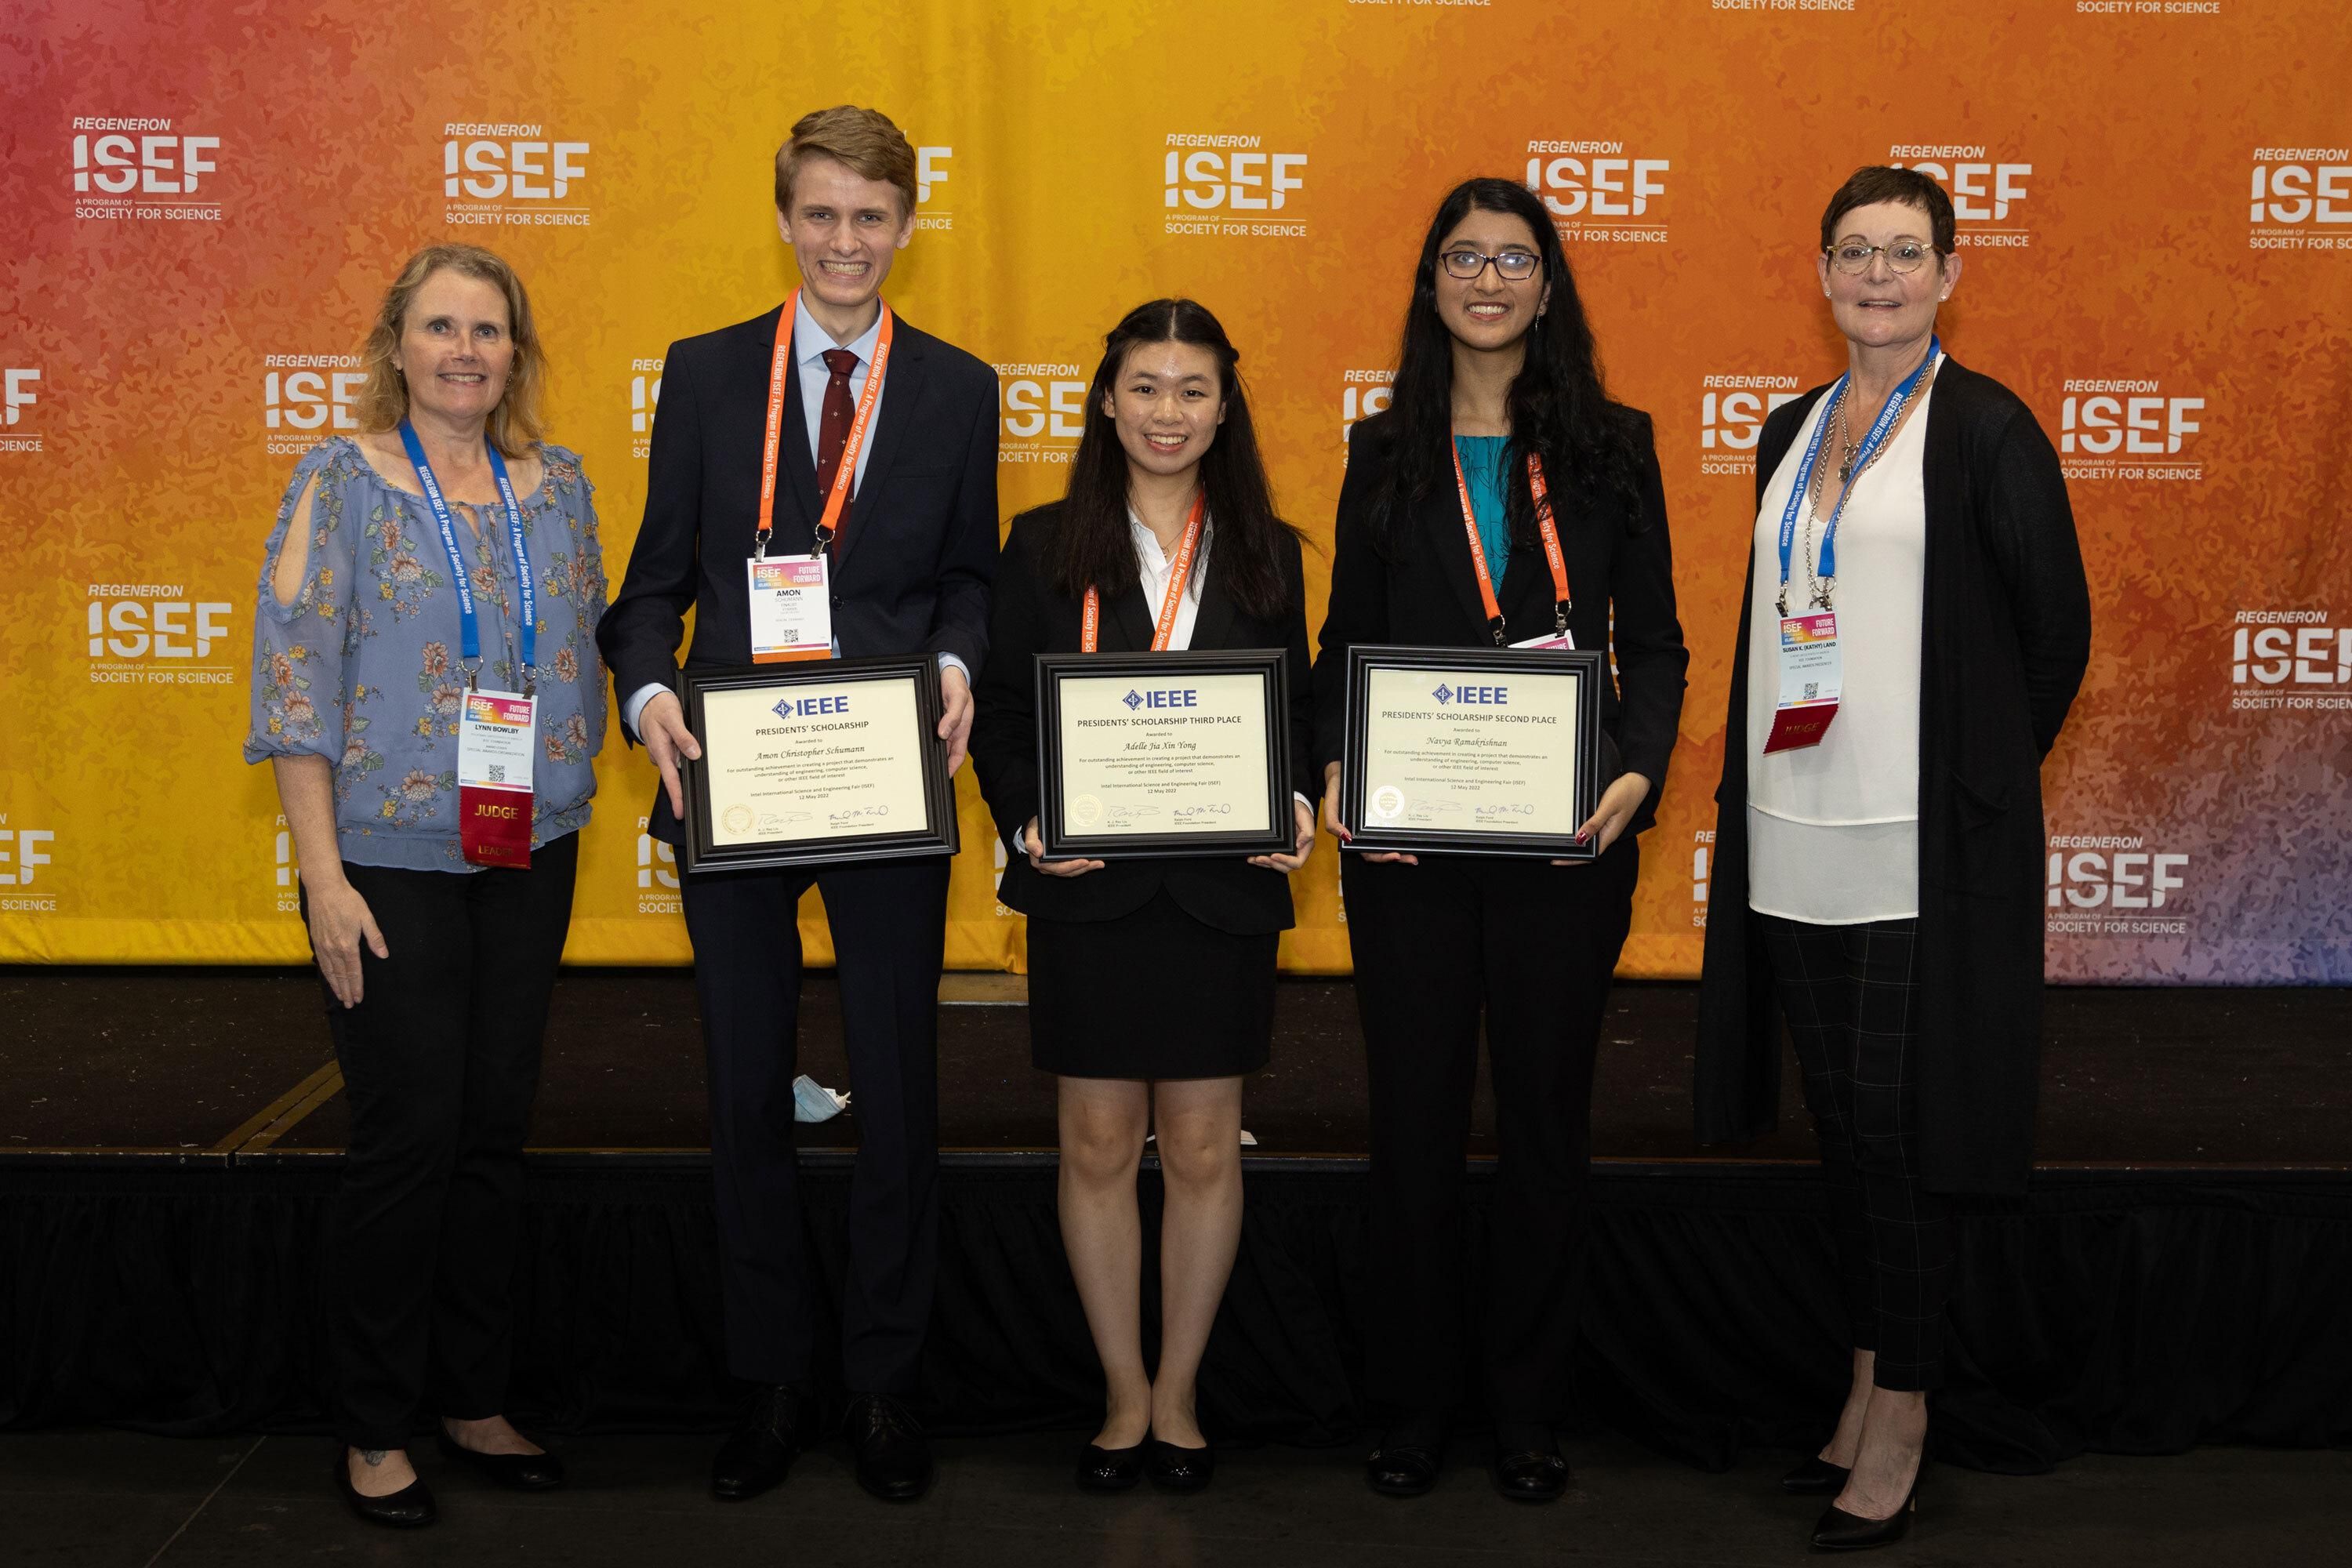 Four females and one male holding certificates are pictured in front of a banner that says ISEF.